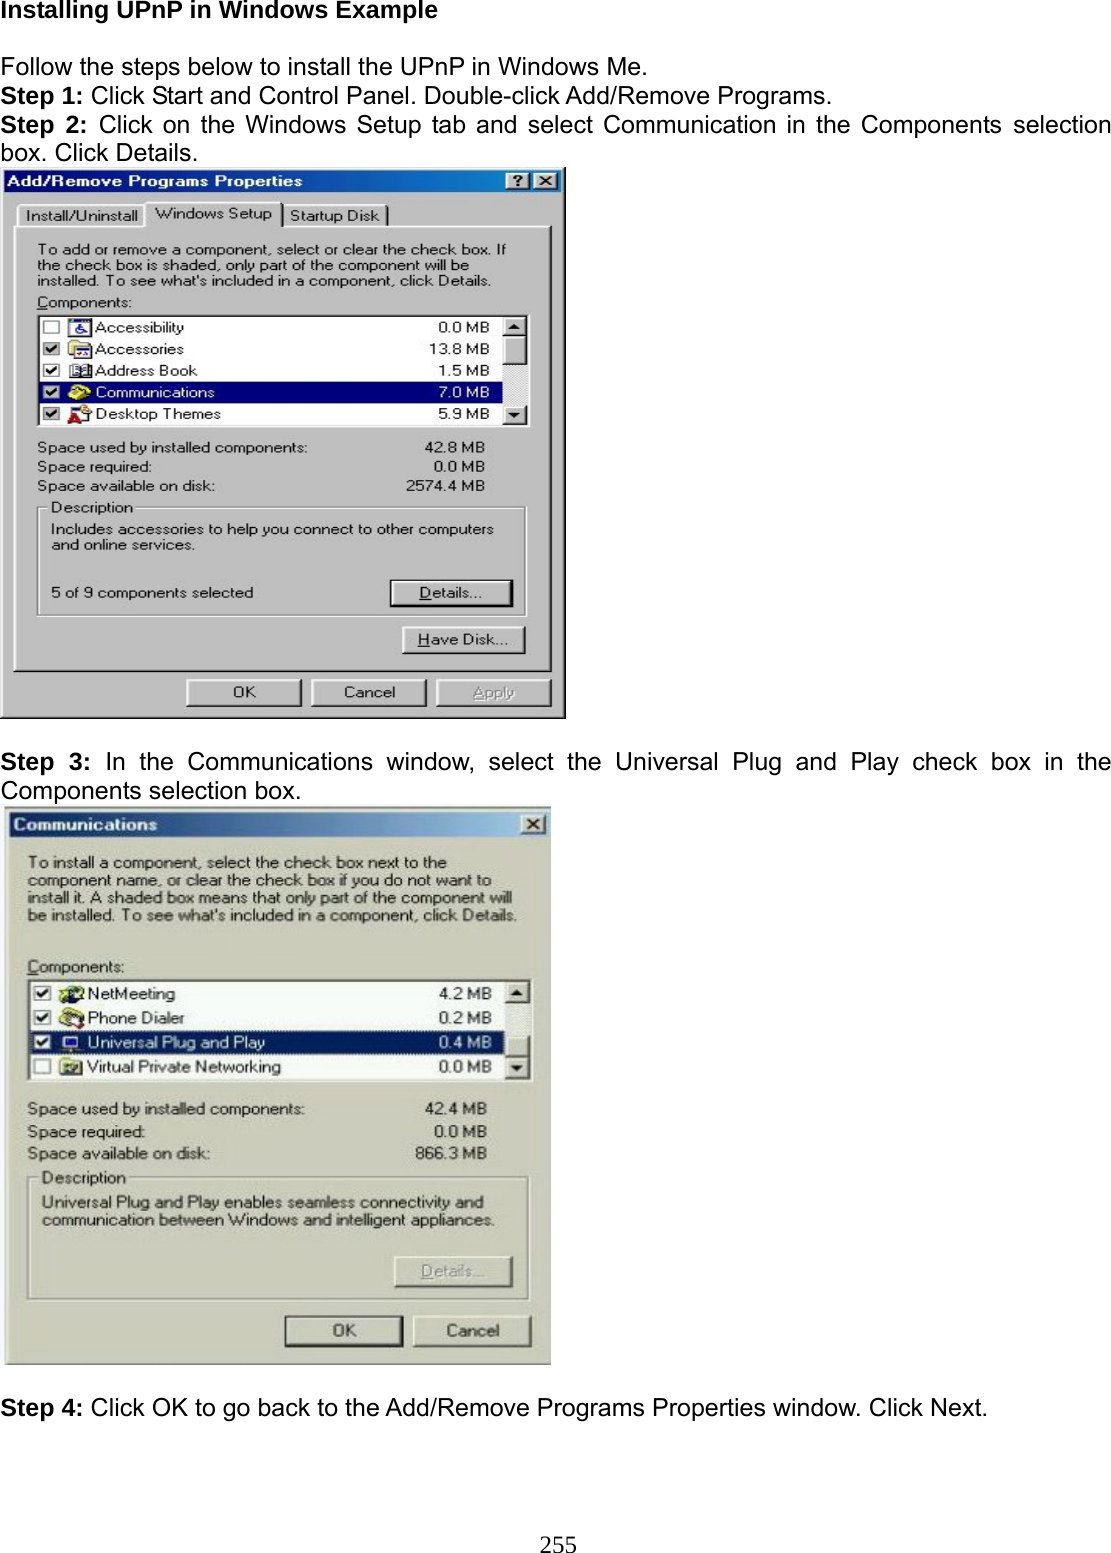 255 Installing UPnP in Windows Example  Follow the steps below to install the UPnP in Windows Me. Step 1: Click Start and Control Panel. Double-click Add/Remove Programs. Step 2: Click on the Windows Setup tab and select Communication in the Components selection box. Click Details.   Step 3: In the Communications window, select the Universal Plug and Play check box in the Components selection box.    Step 4: Click OK to go back to the Add/Remove Programs Properties window. Click Next. 